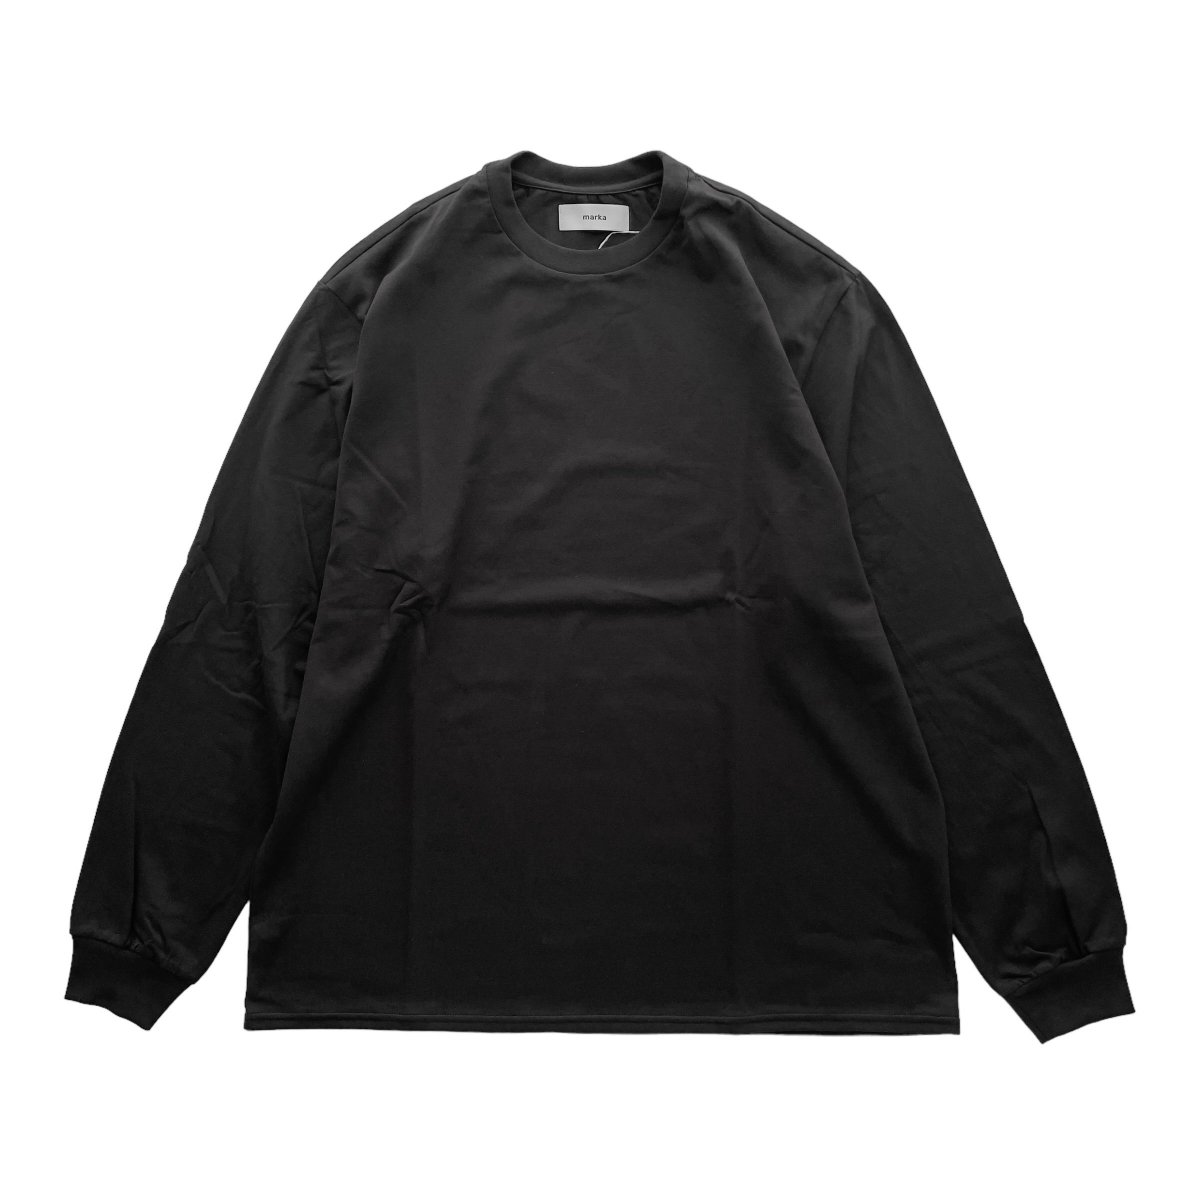 marka <BR>CREW NECK TEE L/S - 40/2 ORGANIC COTTON KNIT - (CHARCOAL)